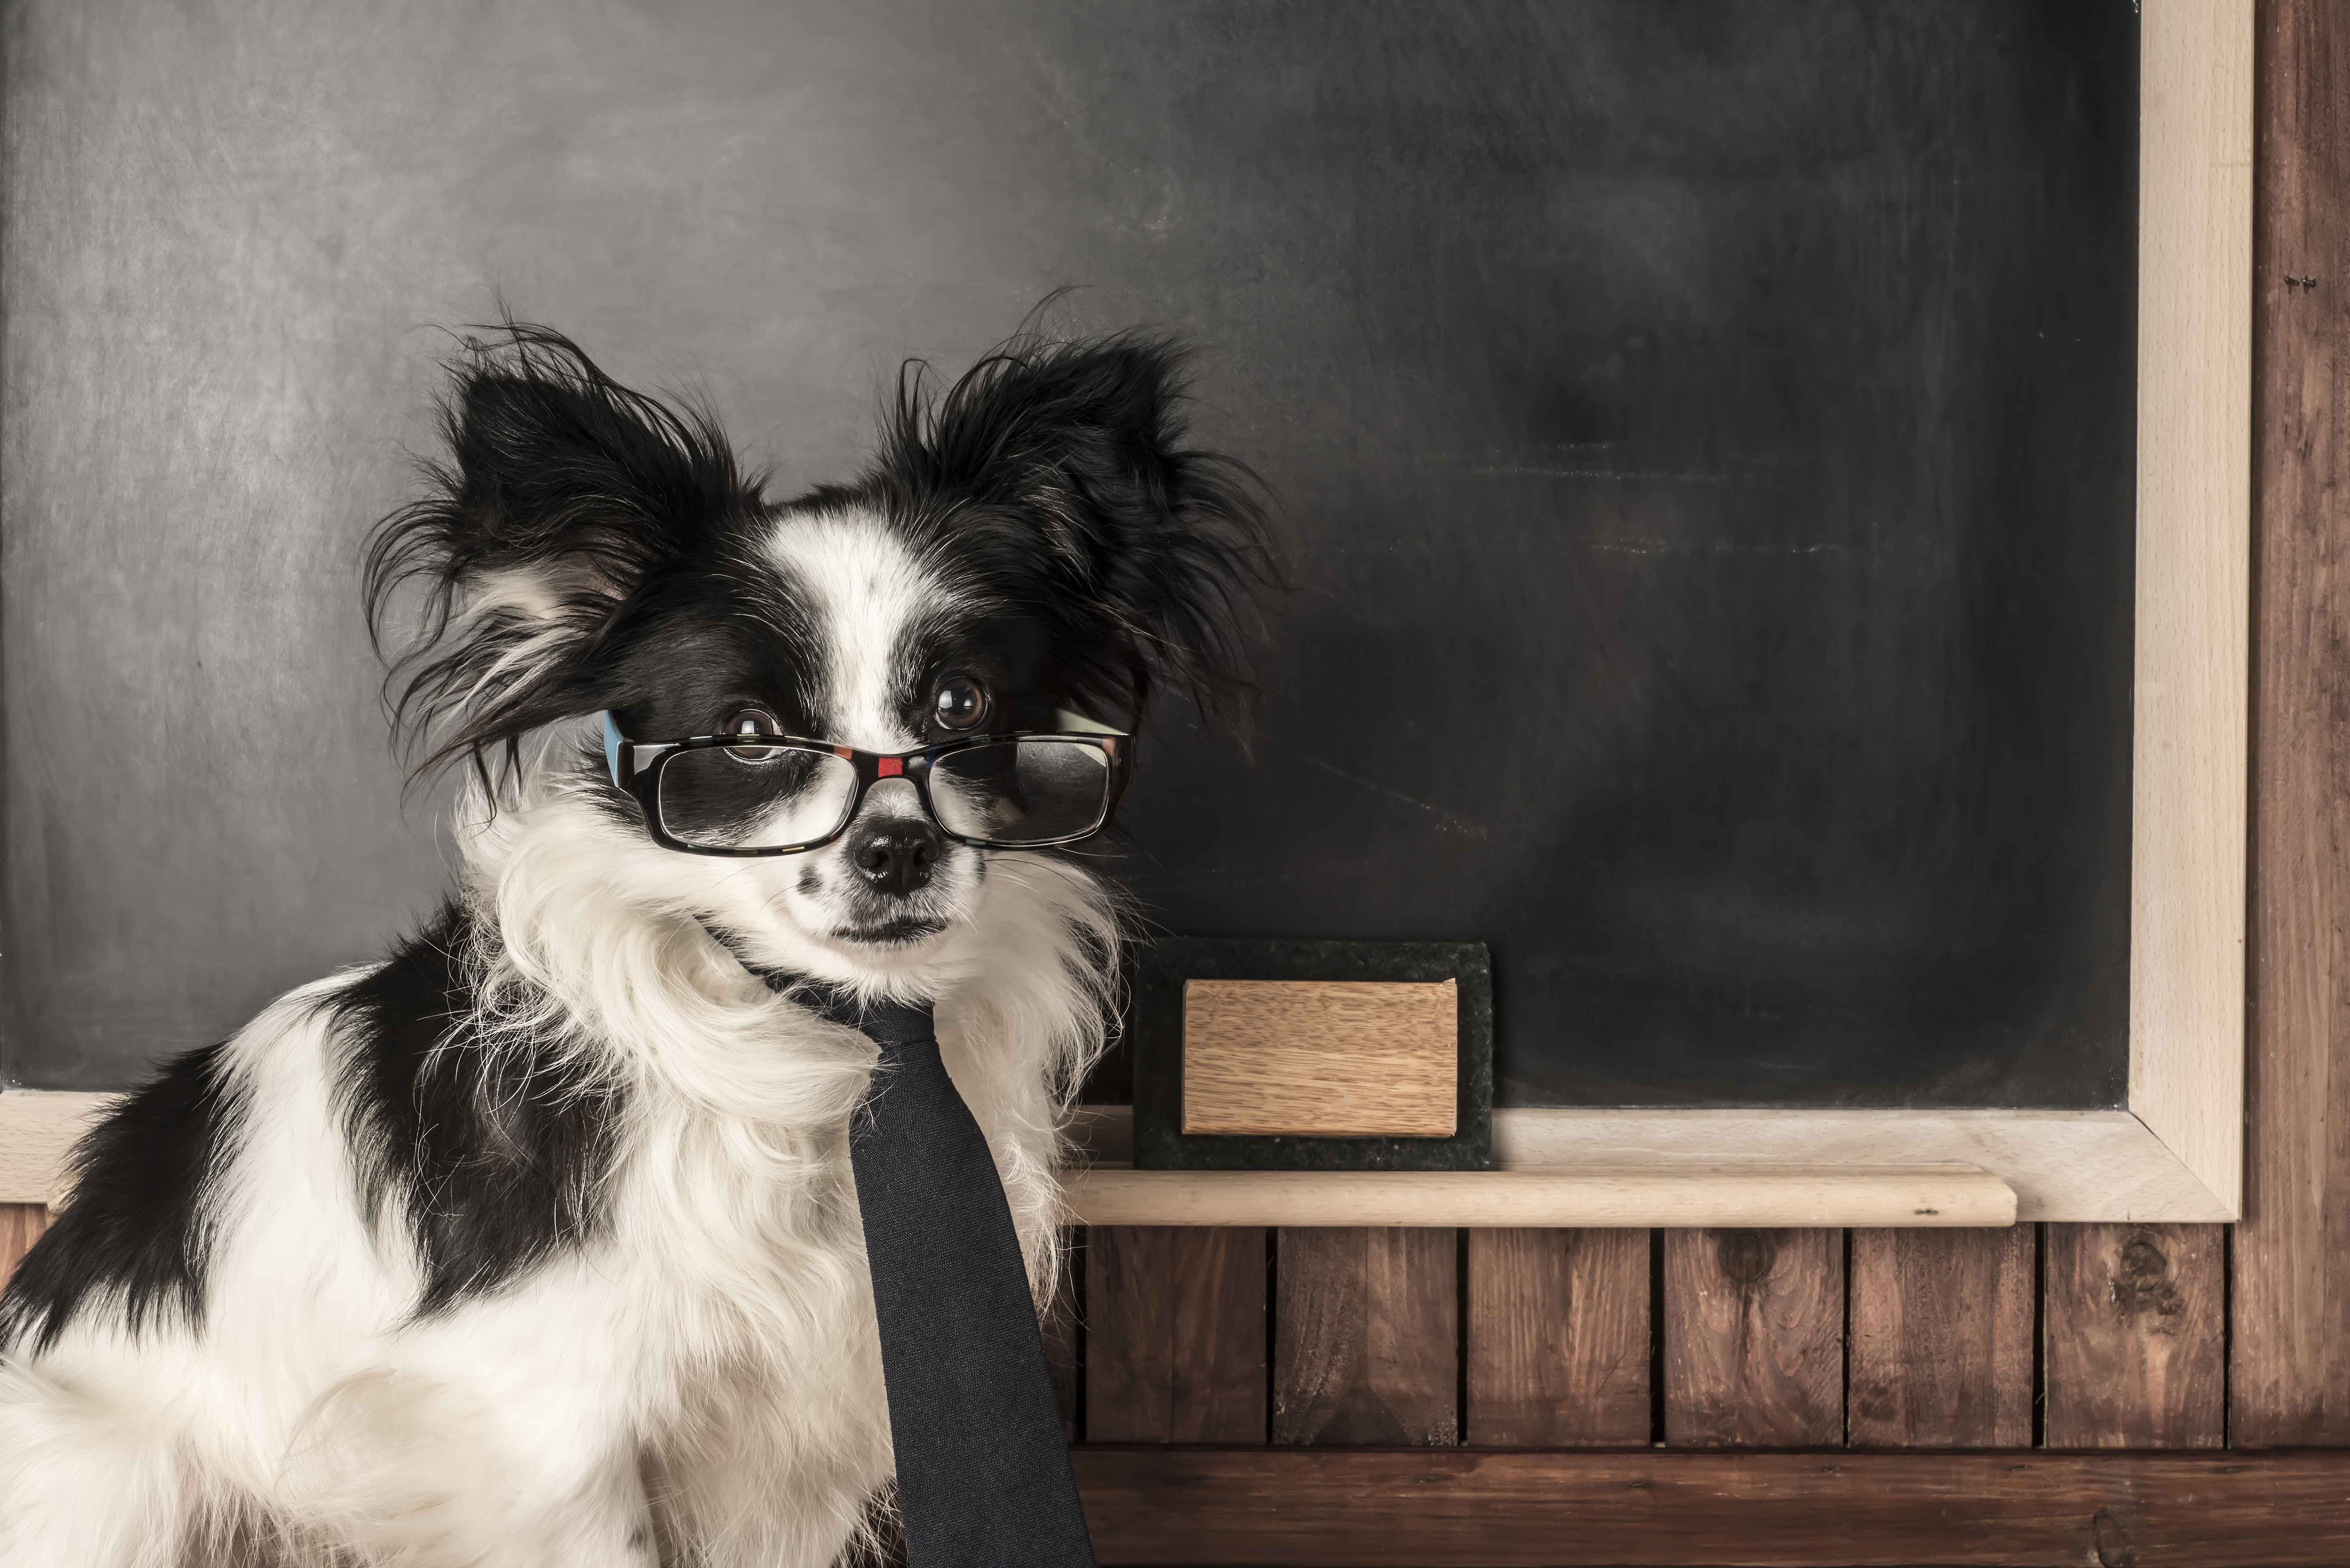 Dog as a school teacher with glasses and tie, blackboard with empty space for writing